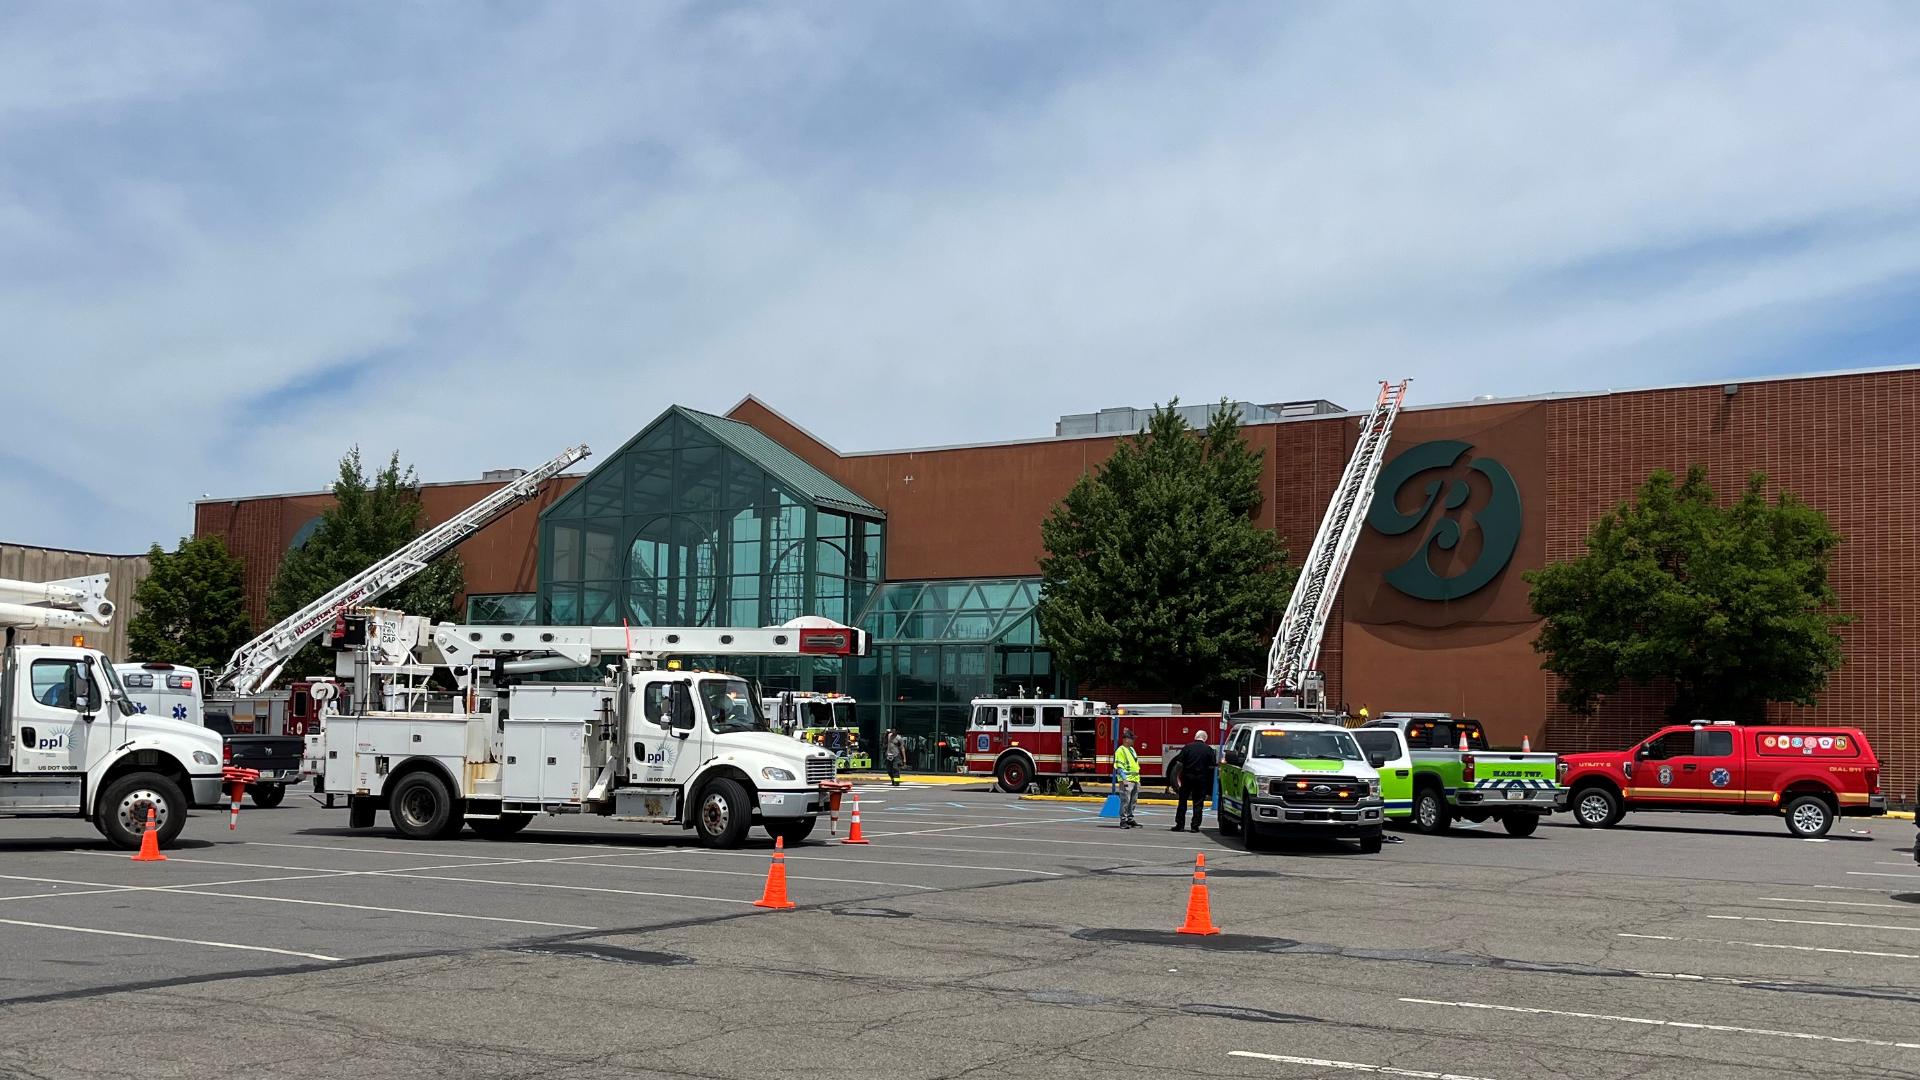 Firefighters were called to the Laurel Mall near Hazleton Tuesday morning.